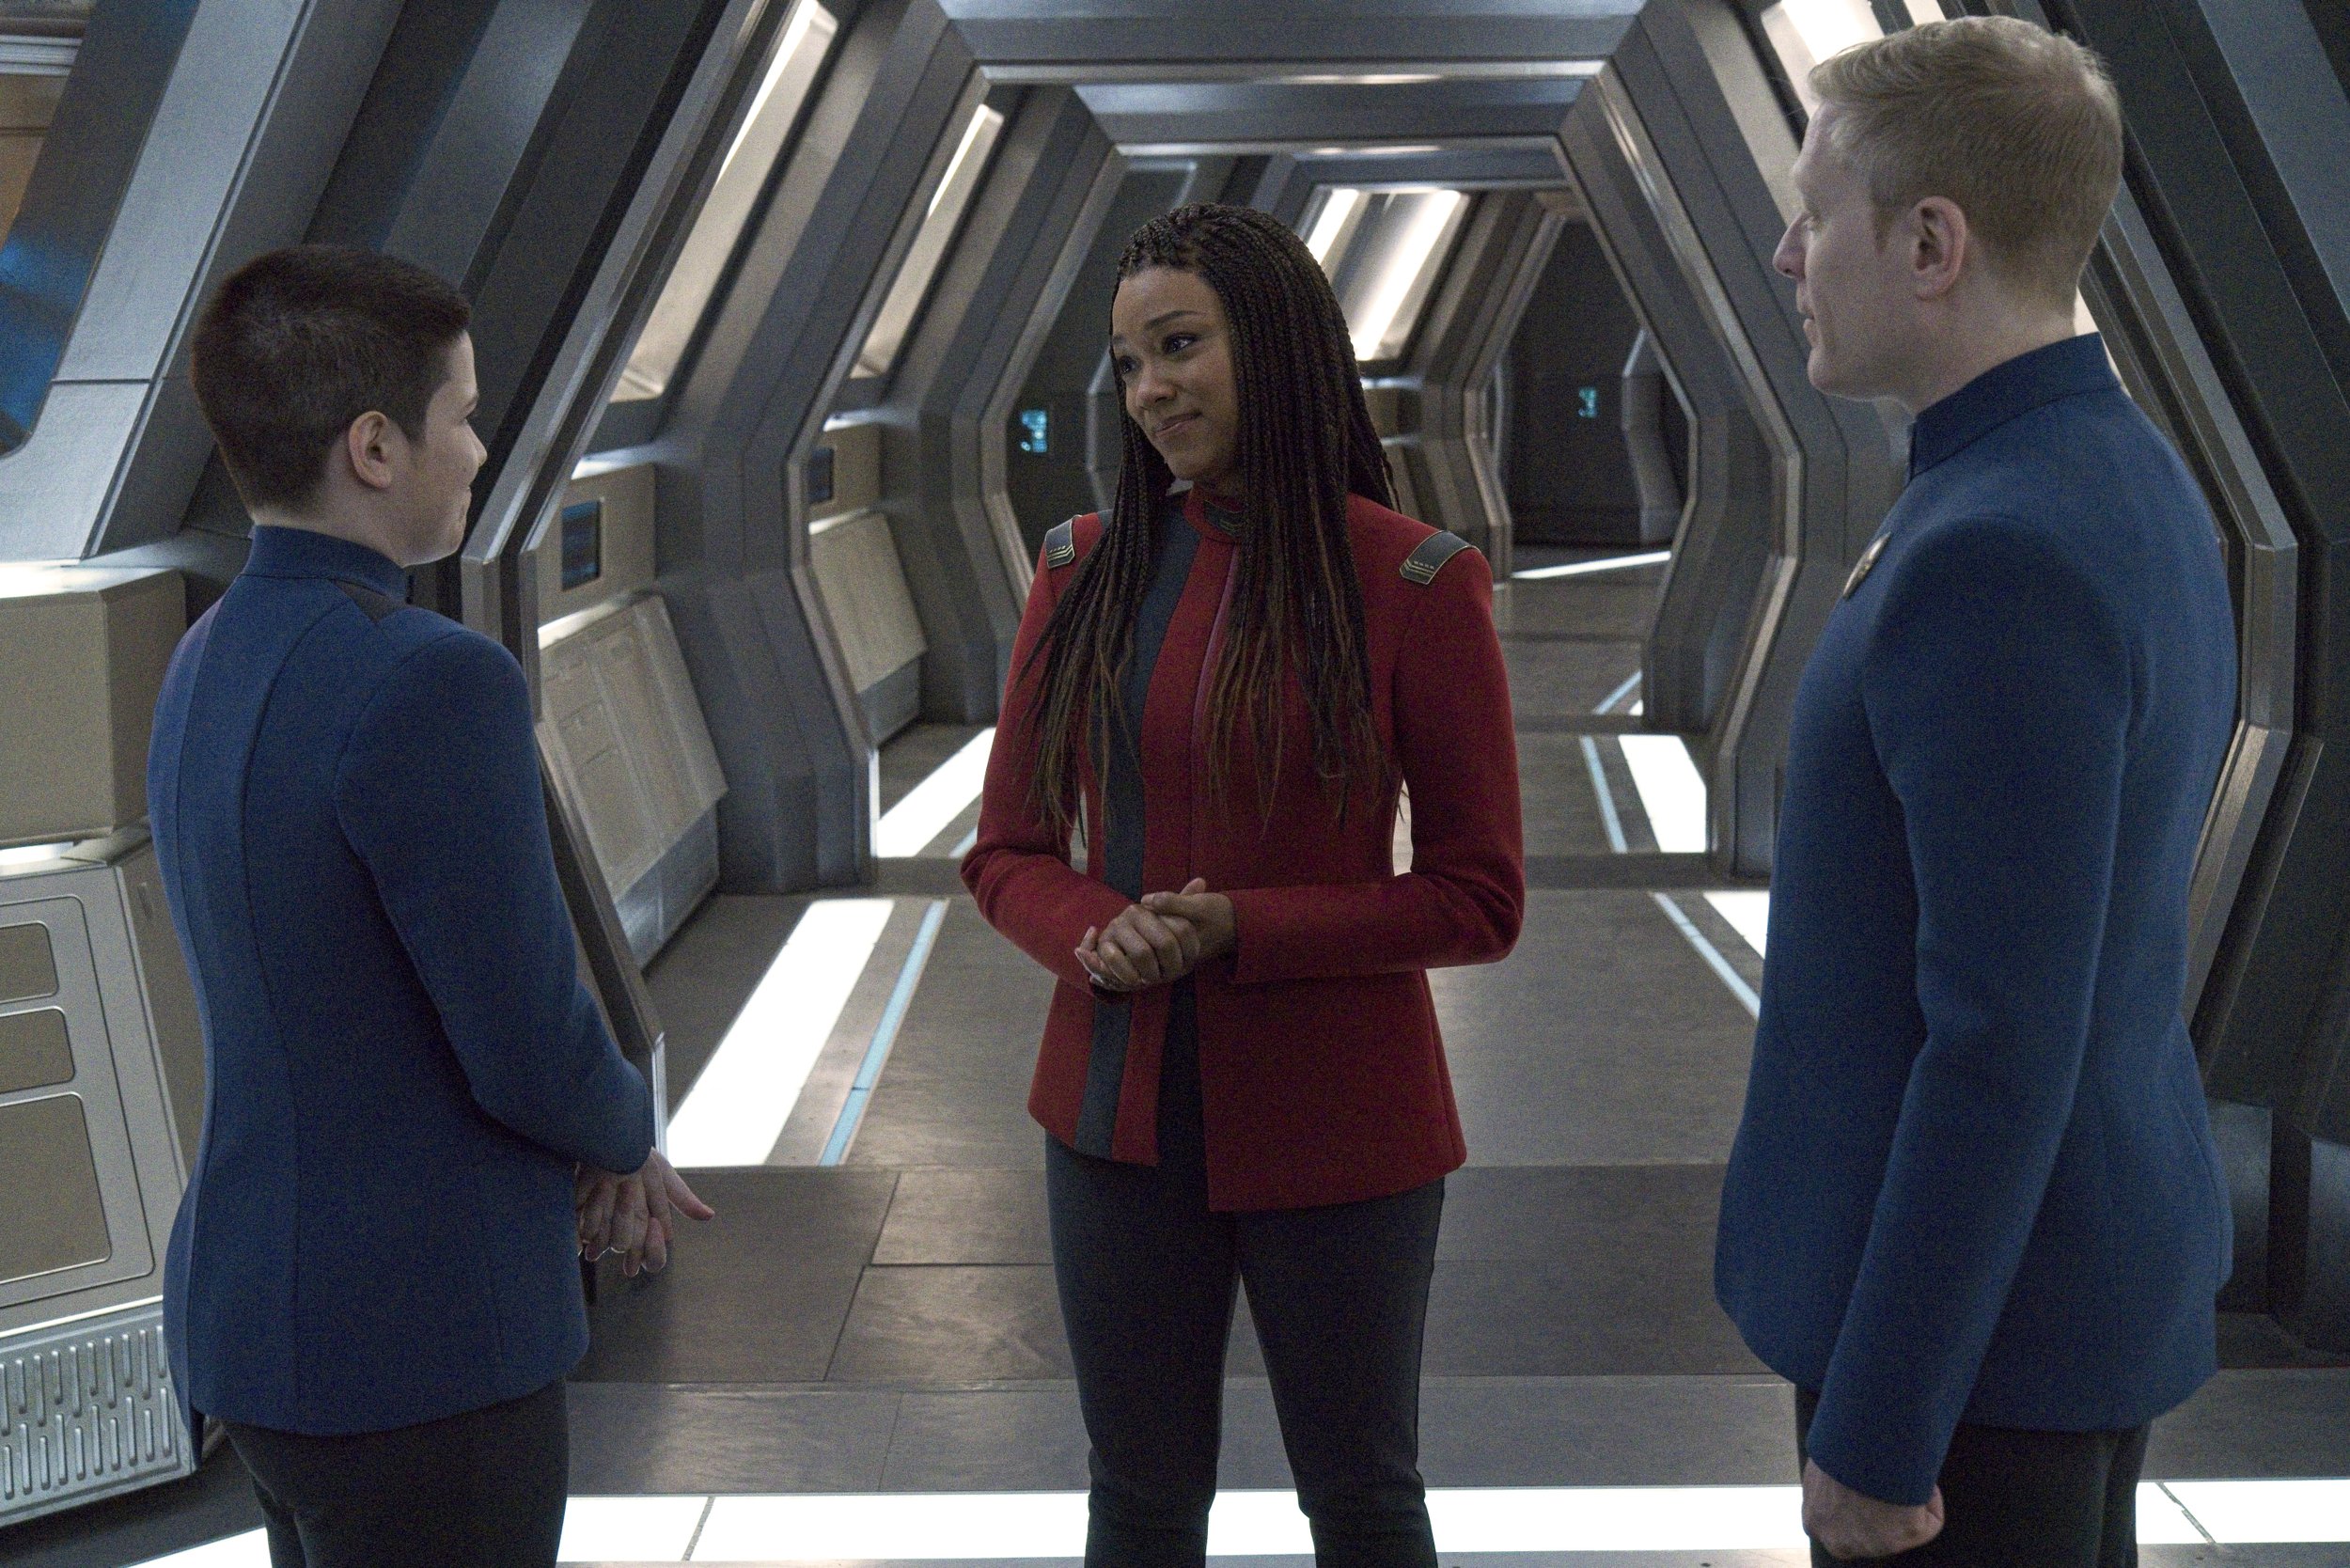   Pictured: Blu del Barrio as Adira, Sonequa Martin Green as Burnham and Anthony Rapp as Stamets of the Paramount+ original series STAR TREK: DISCOVERY. Photo Cr: Michael Gibson/Paramount+ (C) 2021 CBS Interactive. All Rights Reserved.  